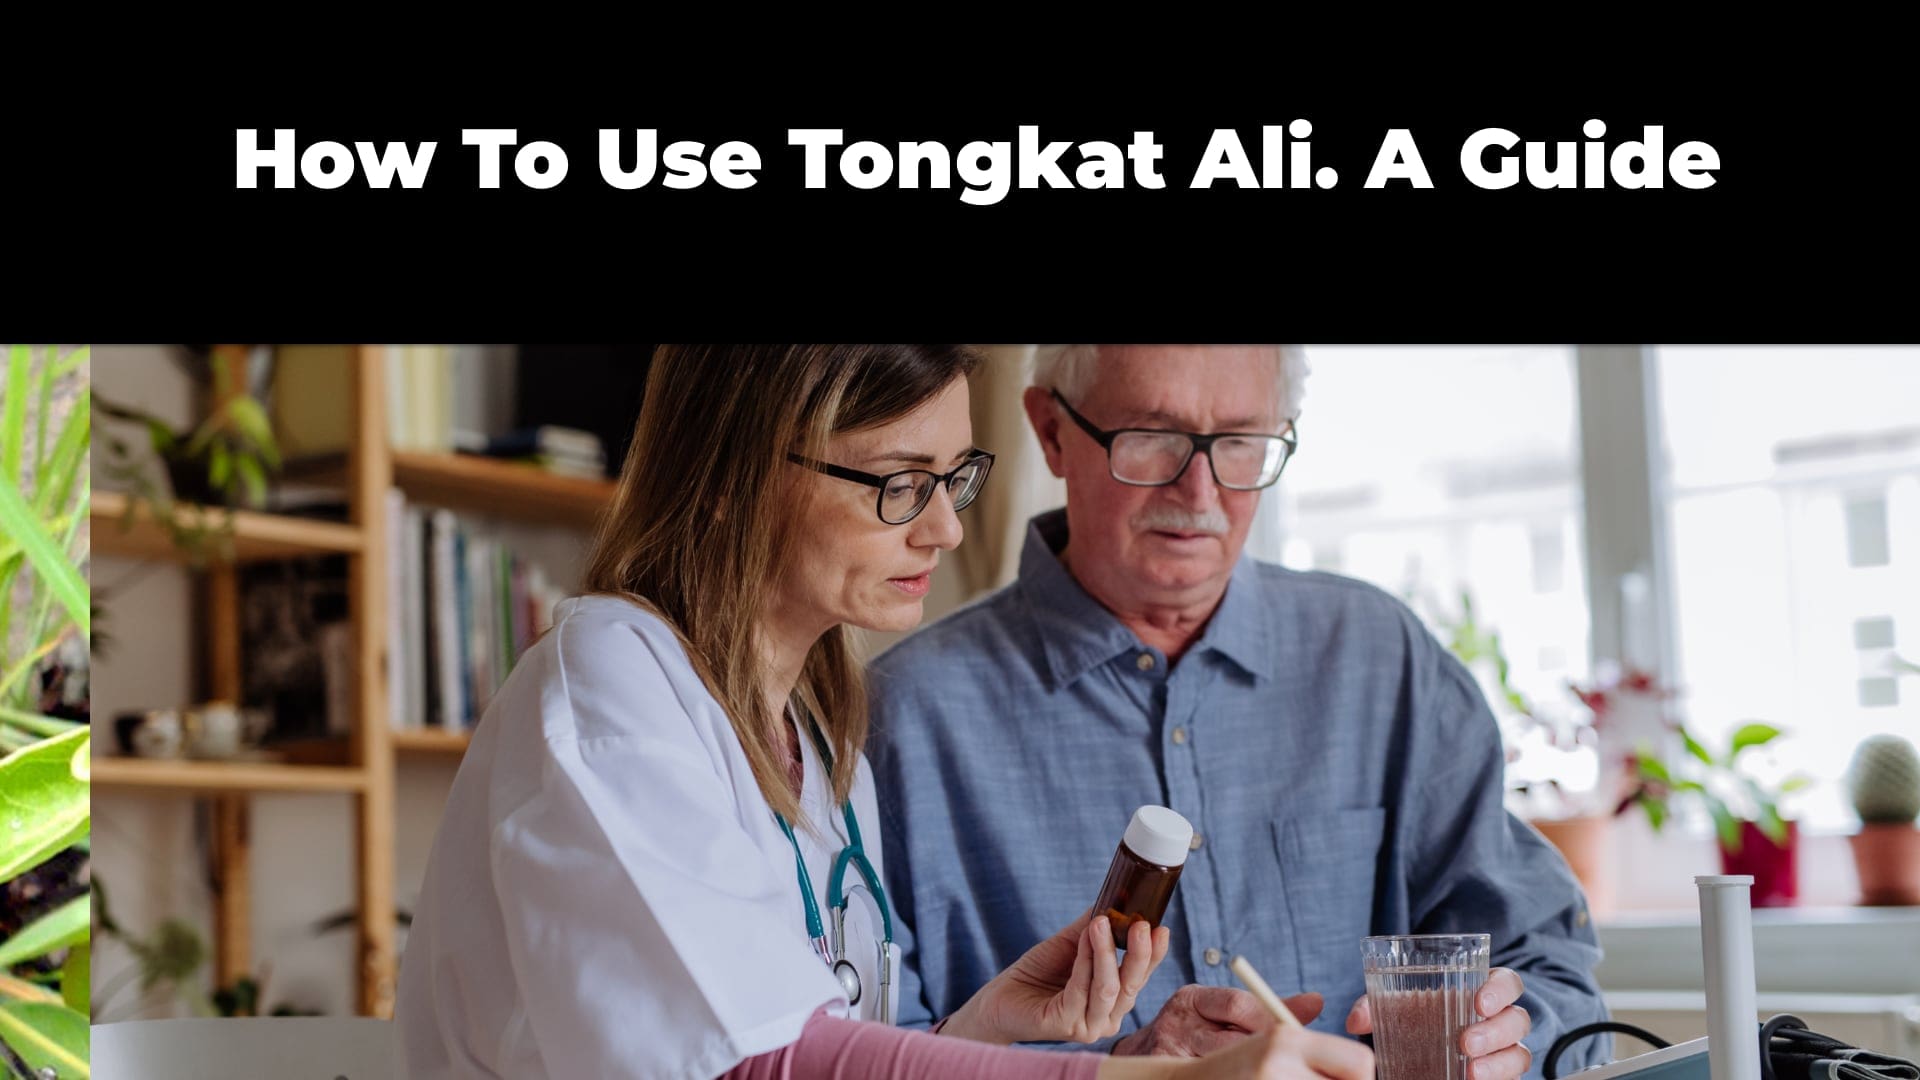 How To Use Tongkat Ali - A Guide